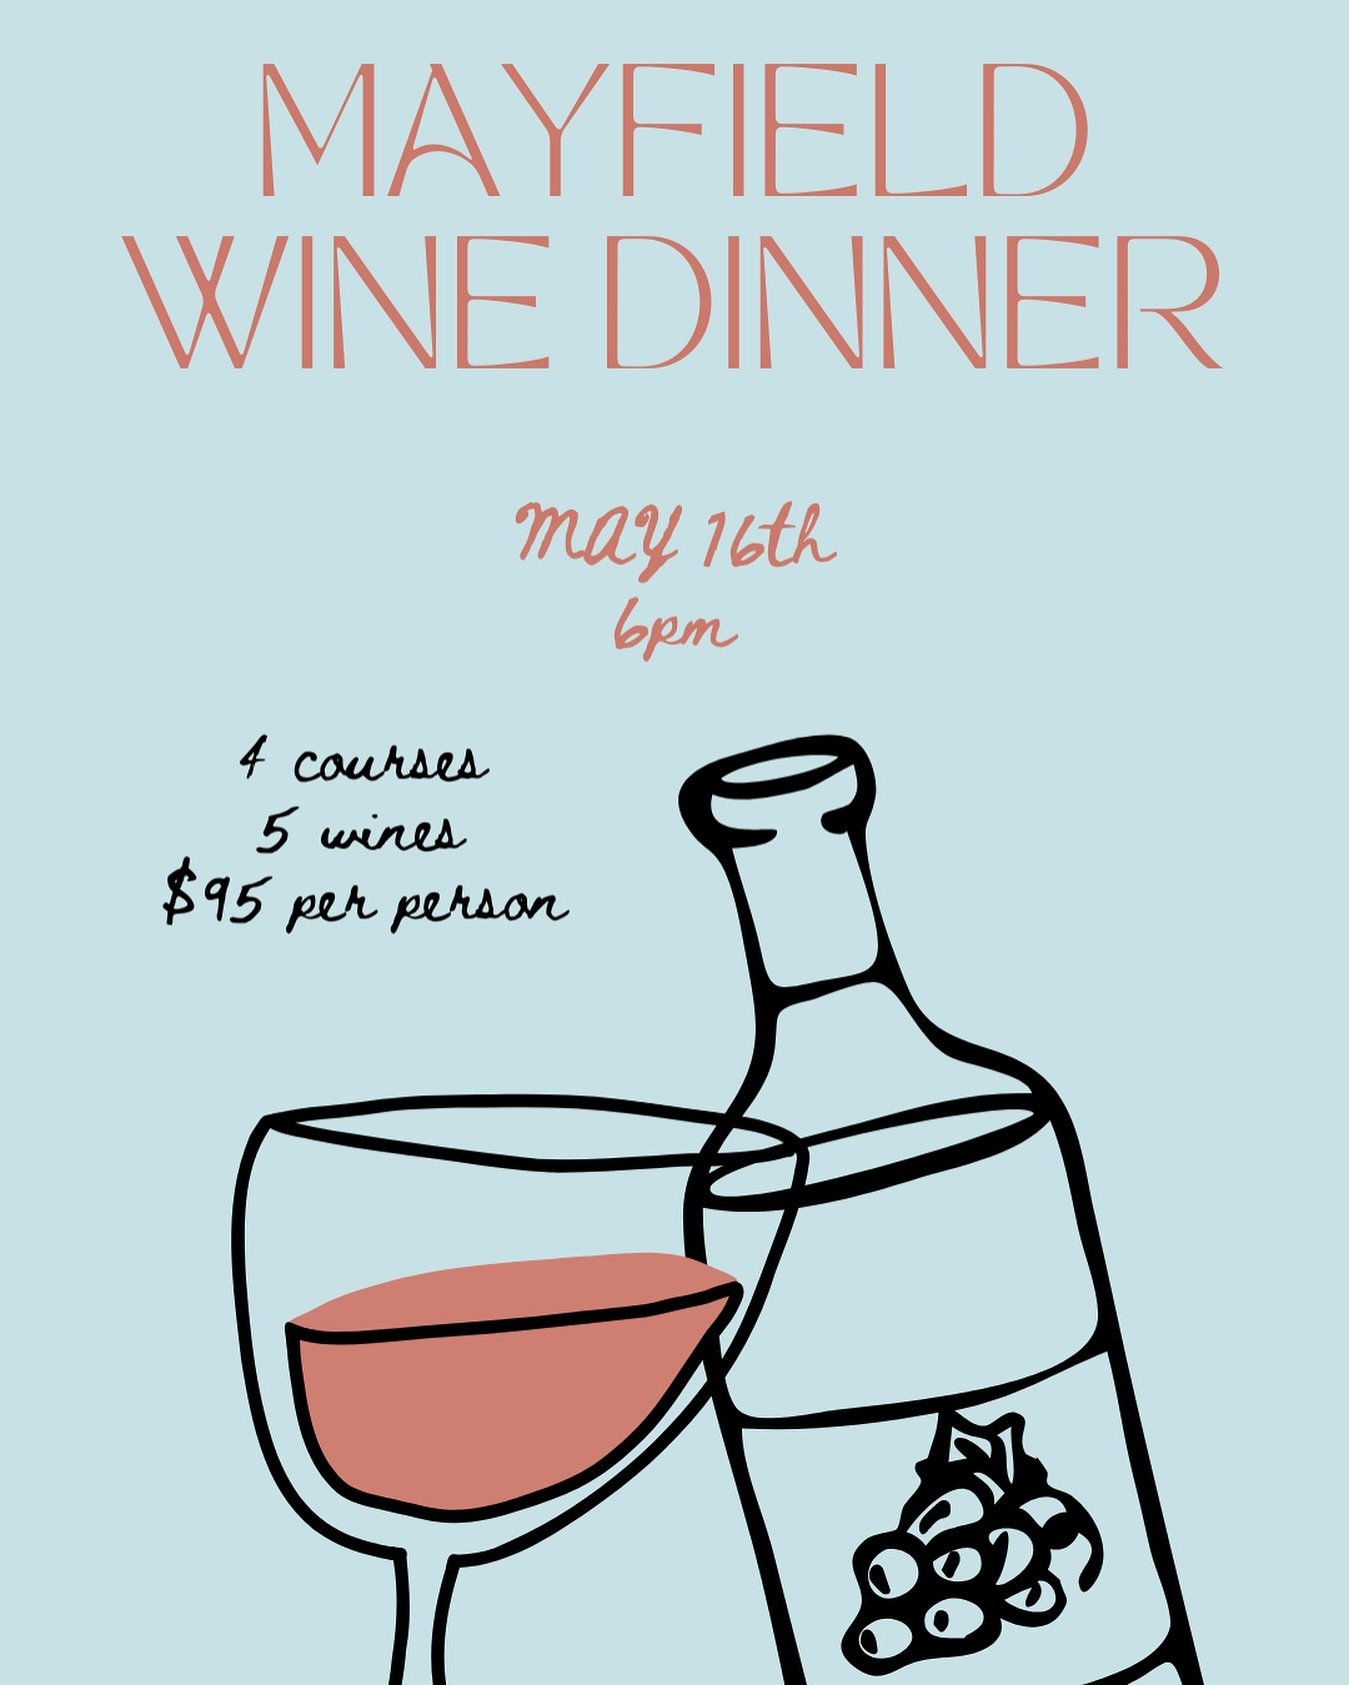 We have a couple of tables open for a wine dinner we are hosting on the May 16th. If you fancy joining us, send us a DM. $95 for 4 courses and 5 wine tastings, crazy bargain if you ask me! 

Here is a little sneak peak at the menu to get those tasteb